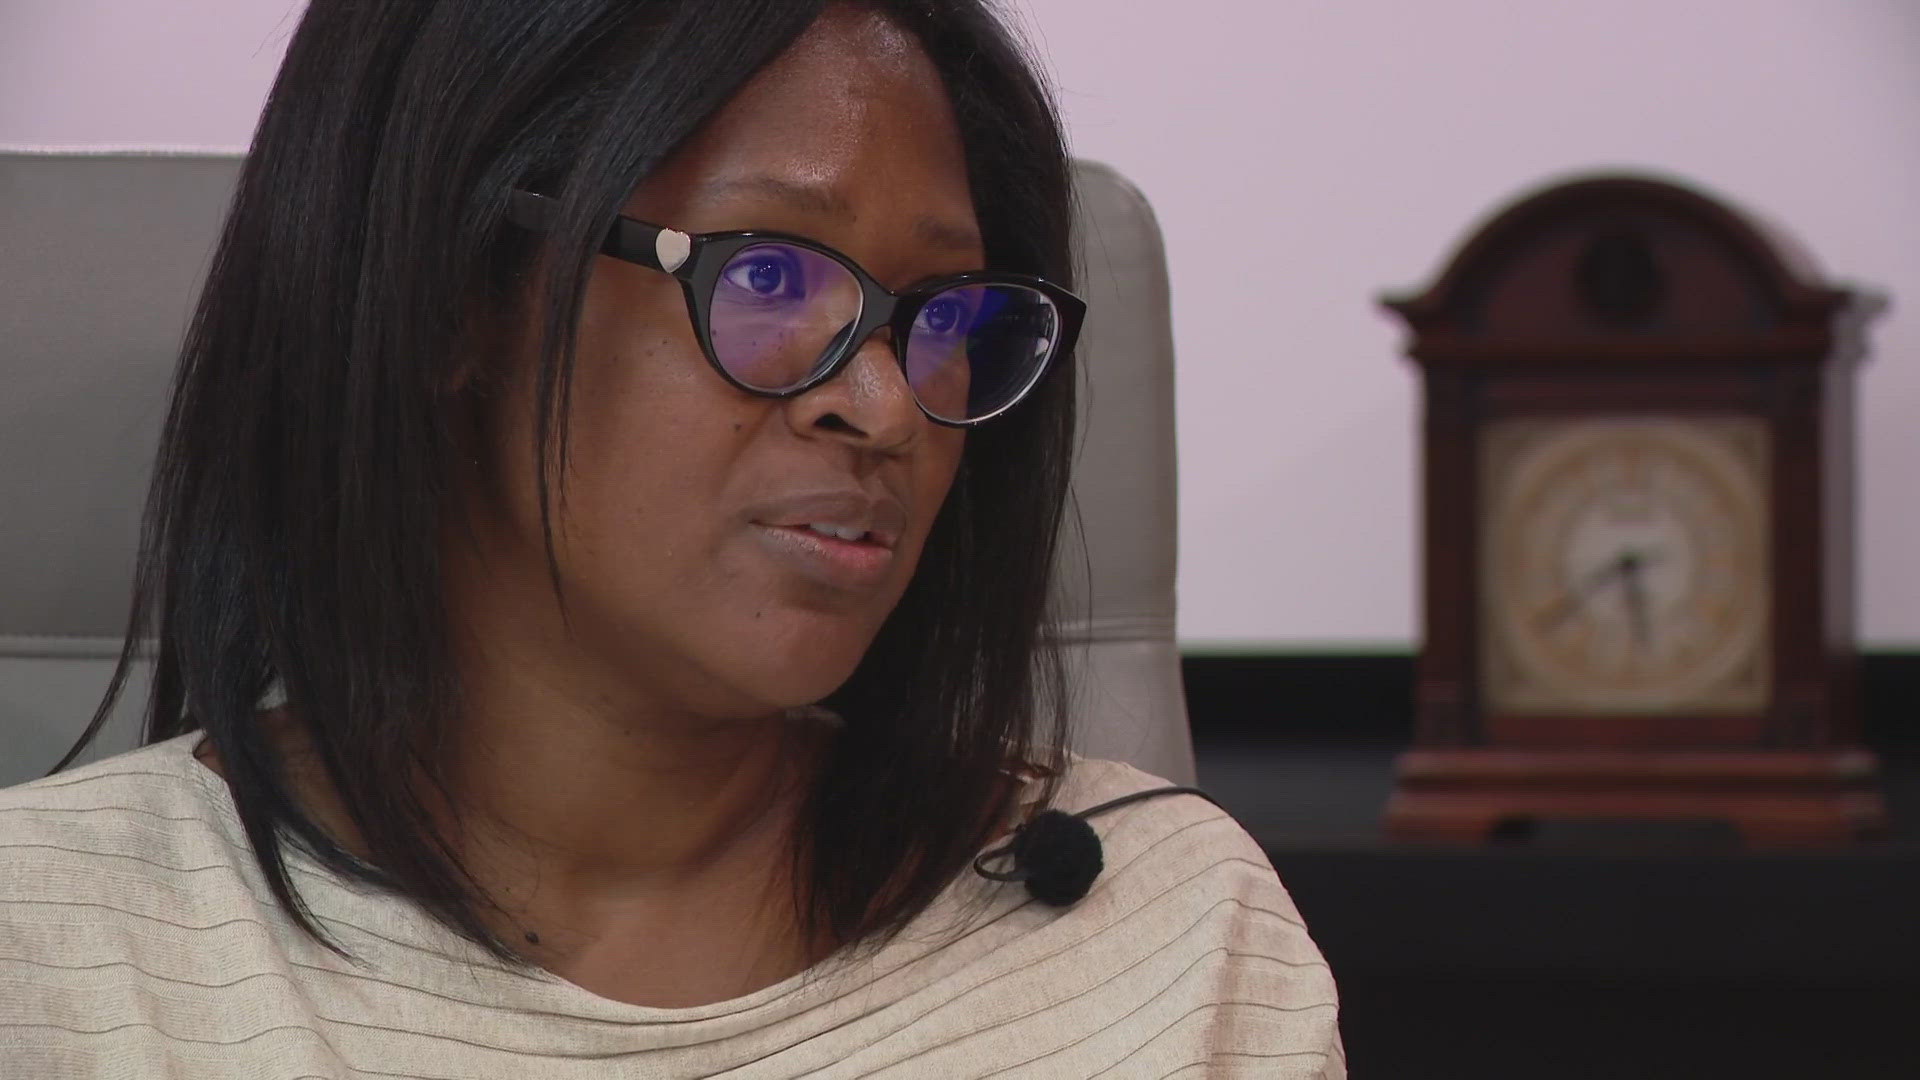 Attorney Lonita Baker, who represented Breonna Taylor's family, is looking for transparency with new LMPD leadership.